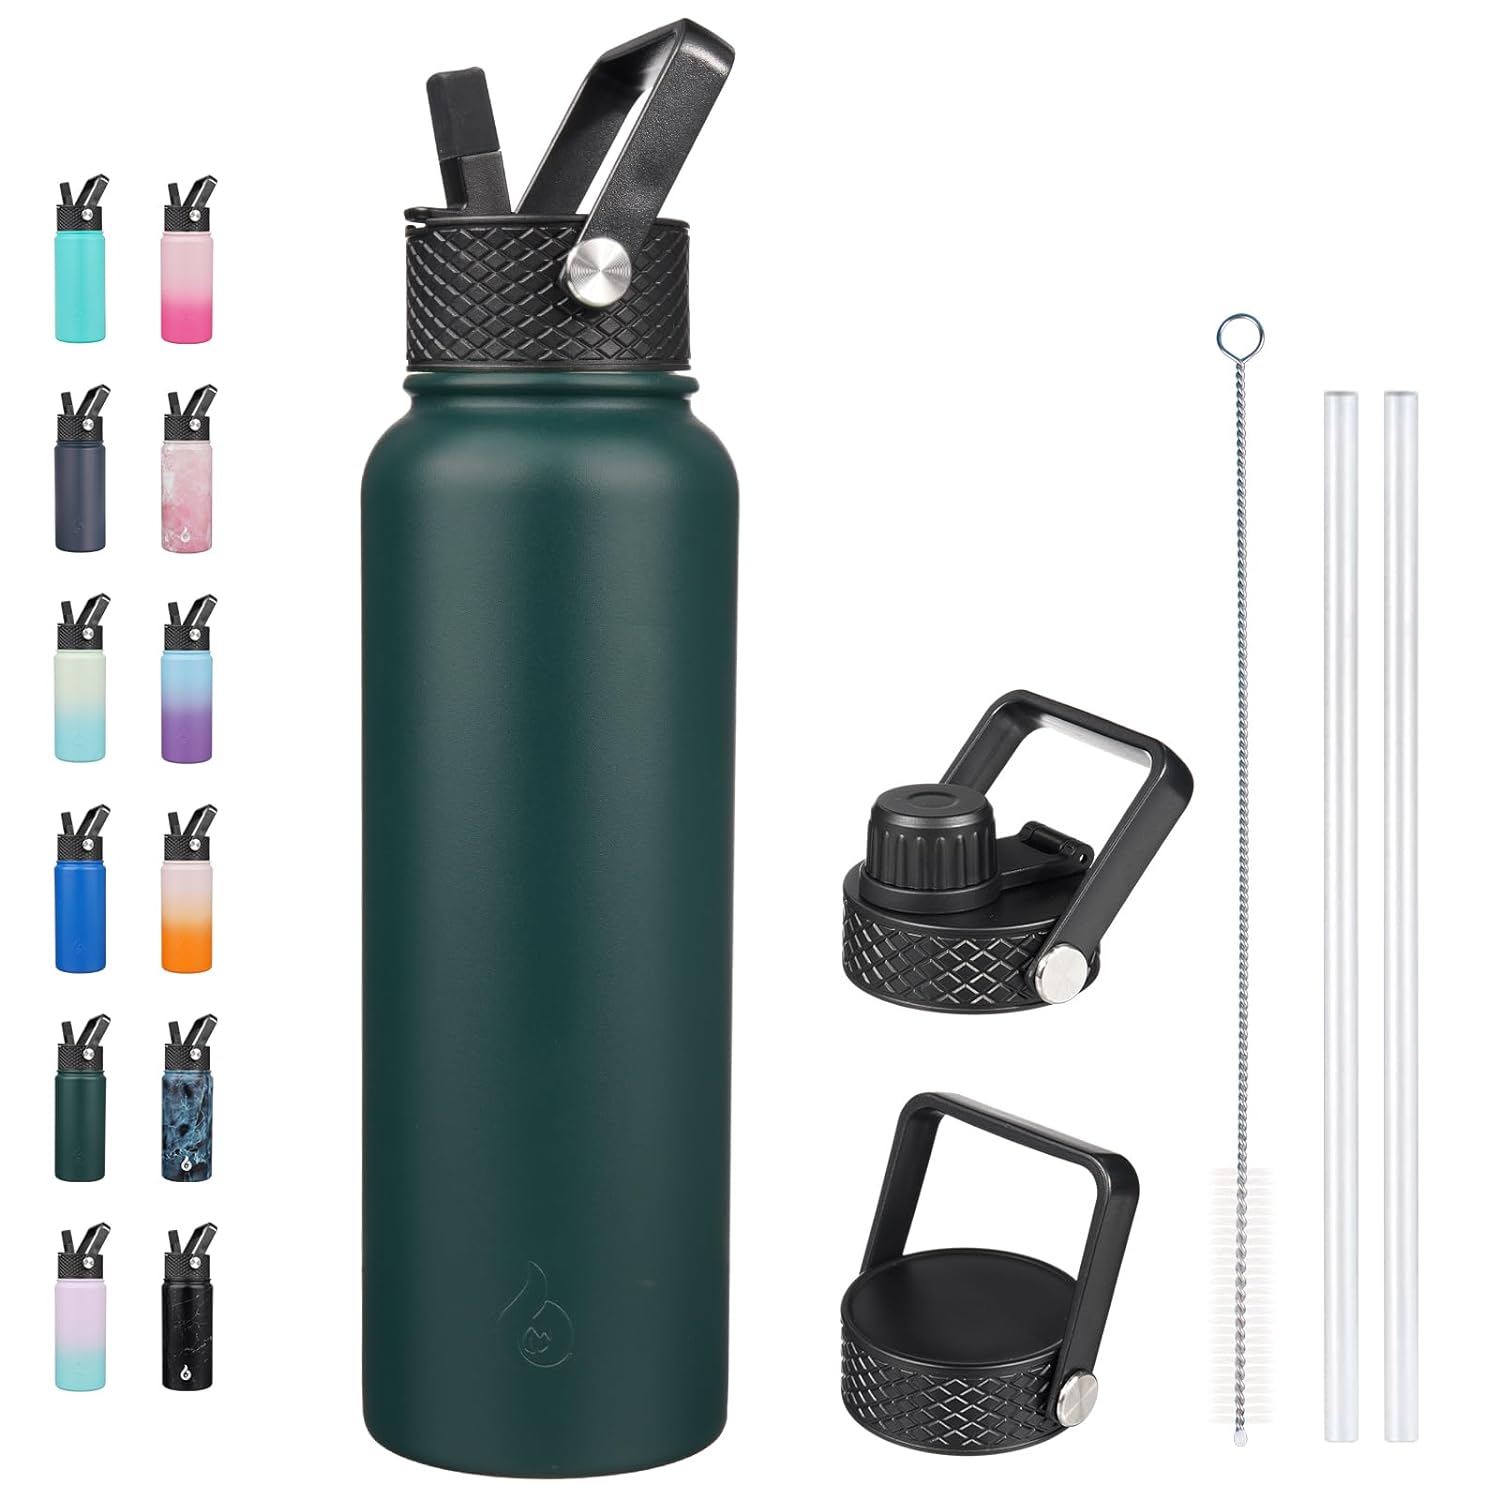 BJPKPK Insulated Water Bottles with Straw Lid, 40oz Large Water Bottle, Stainless Steel Metal Water Bottle with 3 Lids, Reusable Thermos Bottle, Cold & Hot Water Bottle for Sports, Gym-Army Green